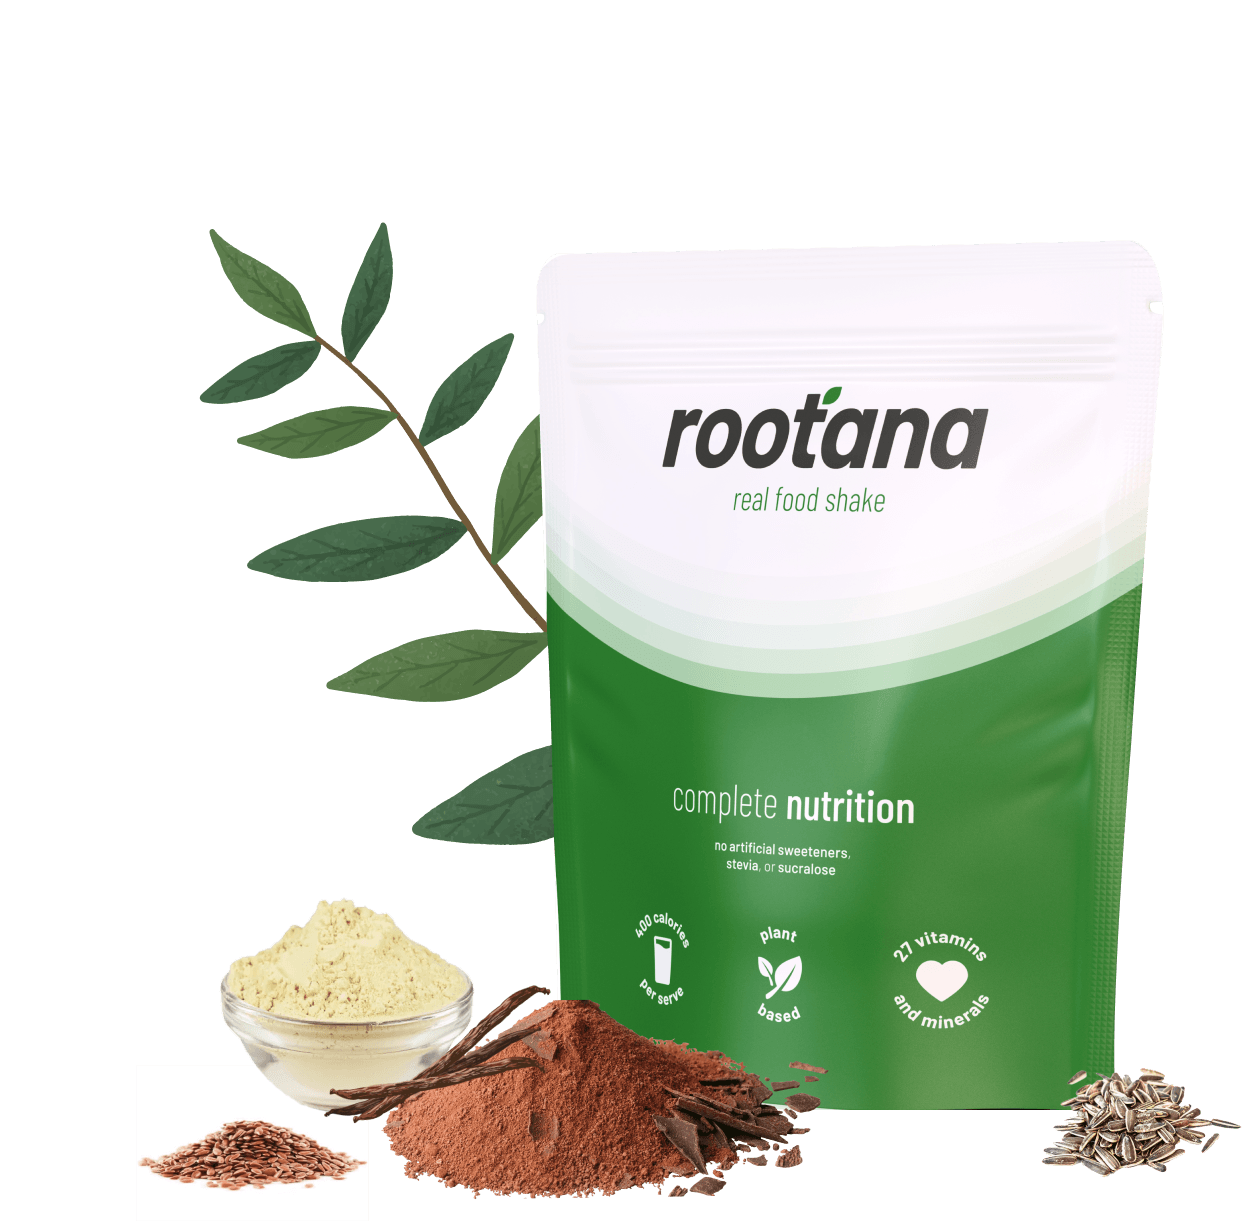 Rootana and ingredients